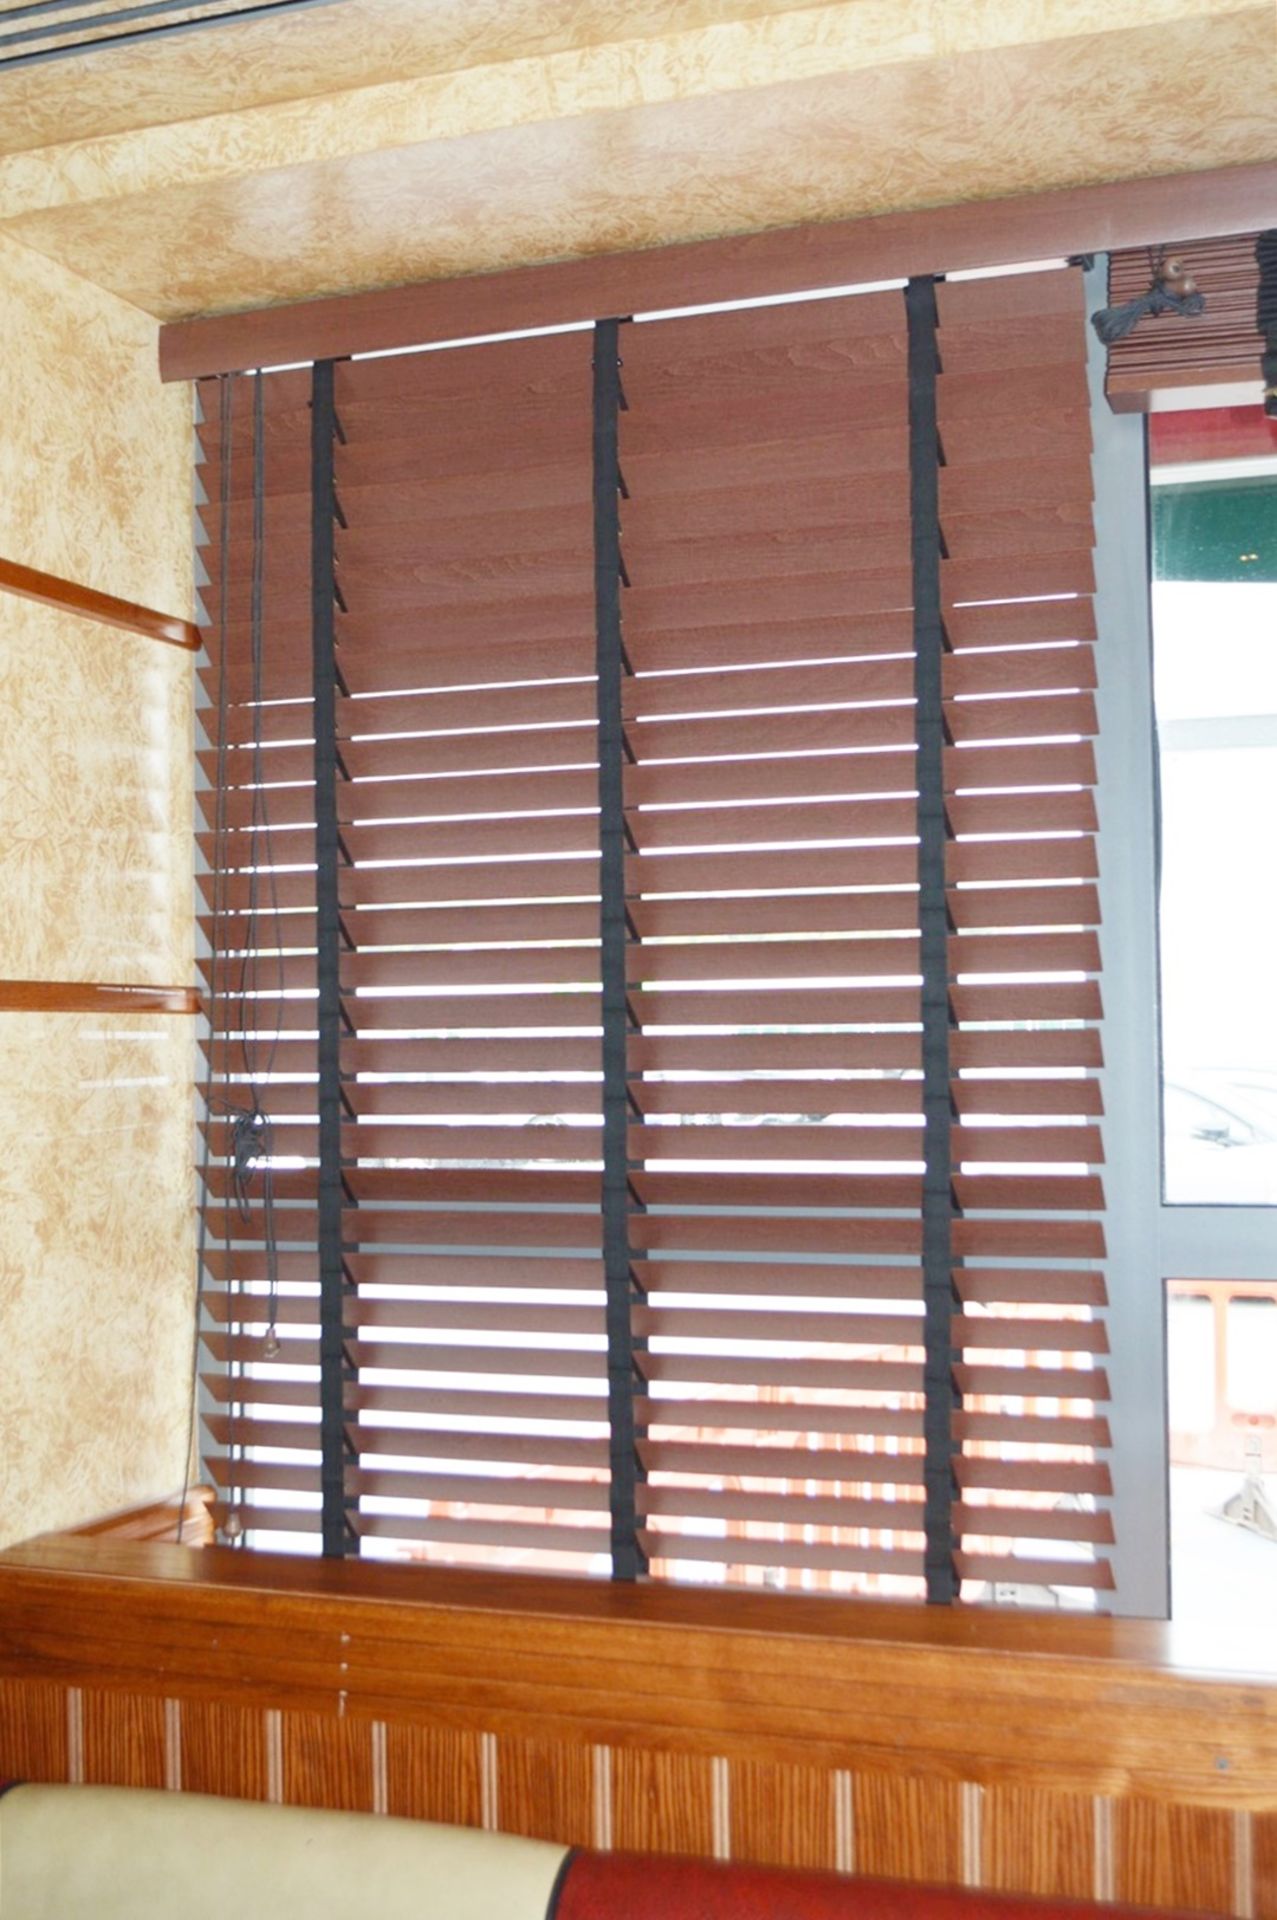 15 x Wooden Venetian Blinds - Various Sizes Included - CL357 - Location: Bolton BL1 Sizes Include: - Image 7 of 8